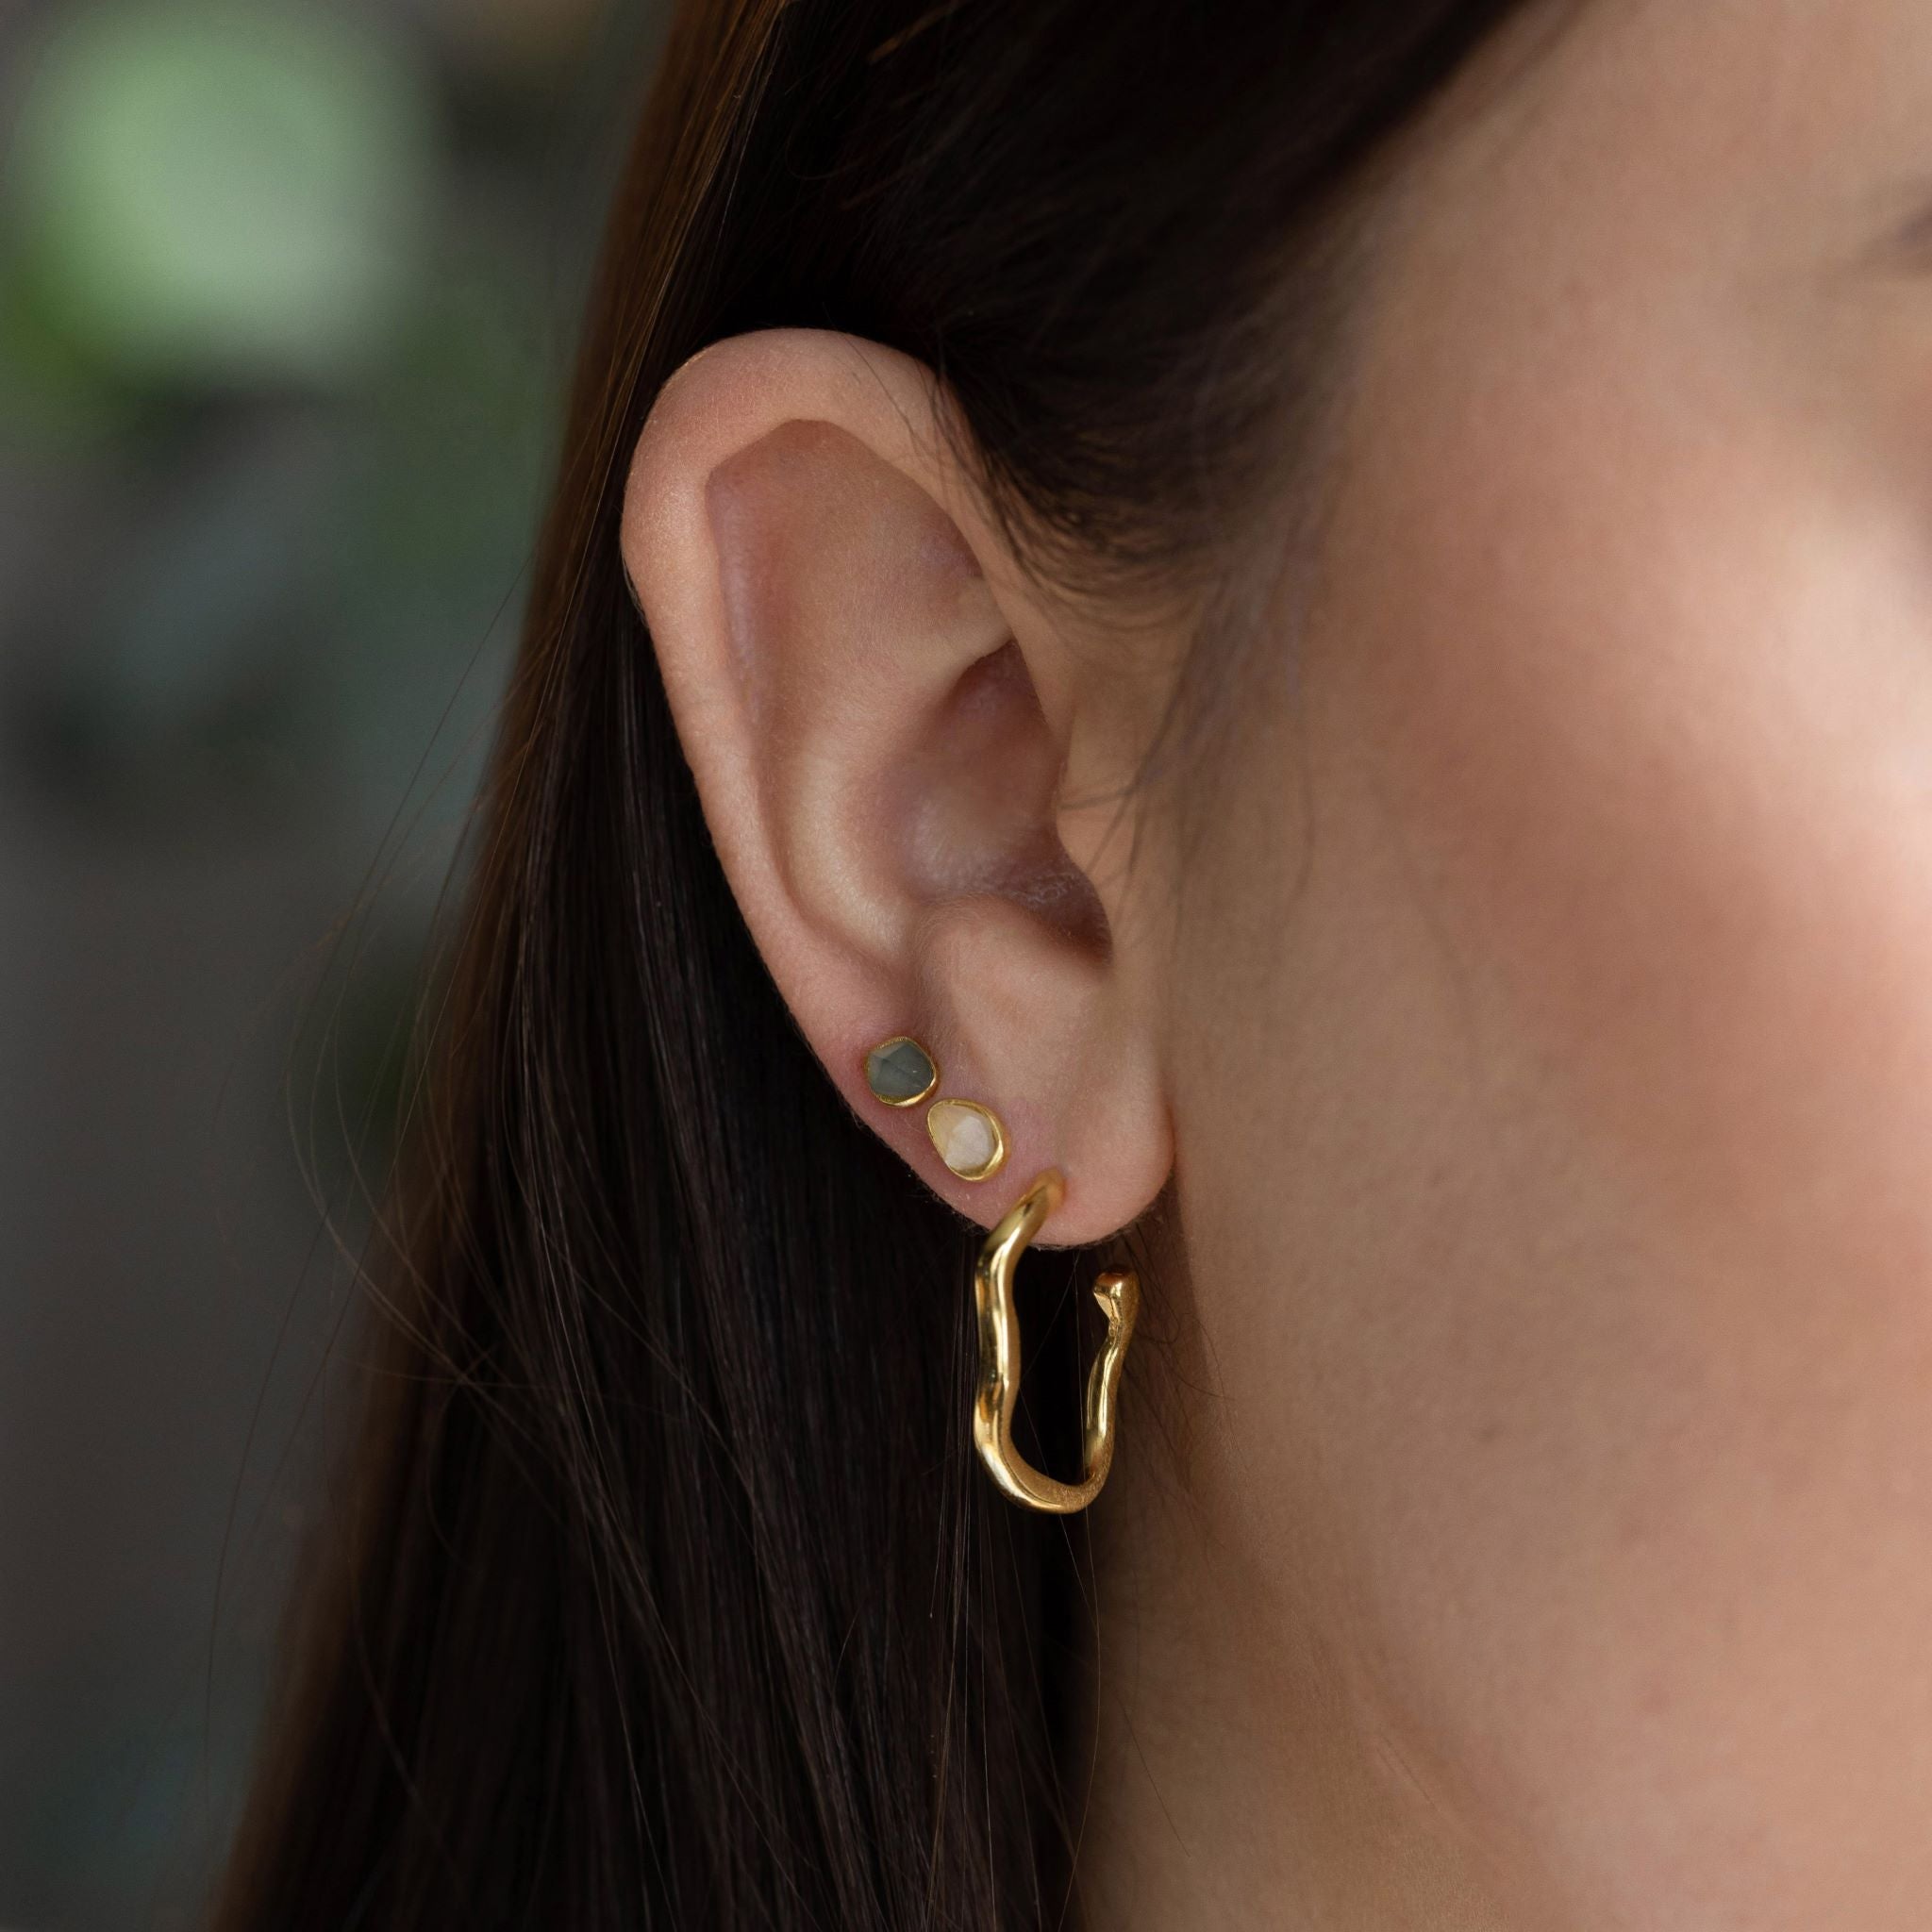 Earrings features a handcut natural ripple shape and is crafted from sterling silver or 18ct gold vermeil.